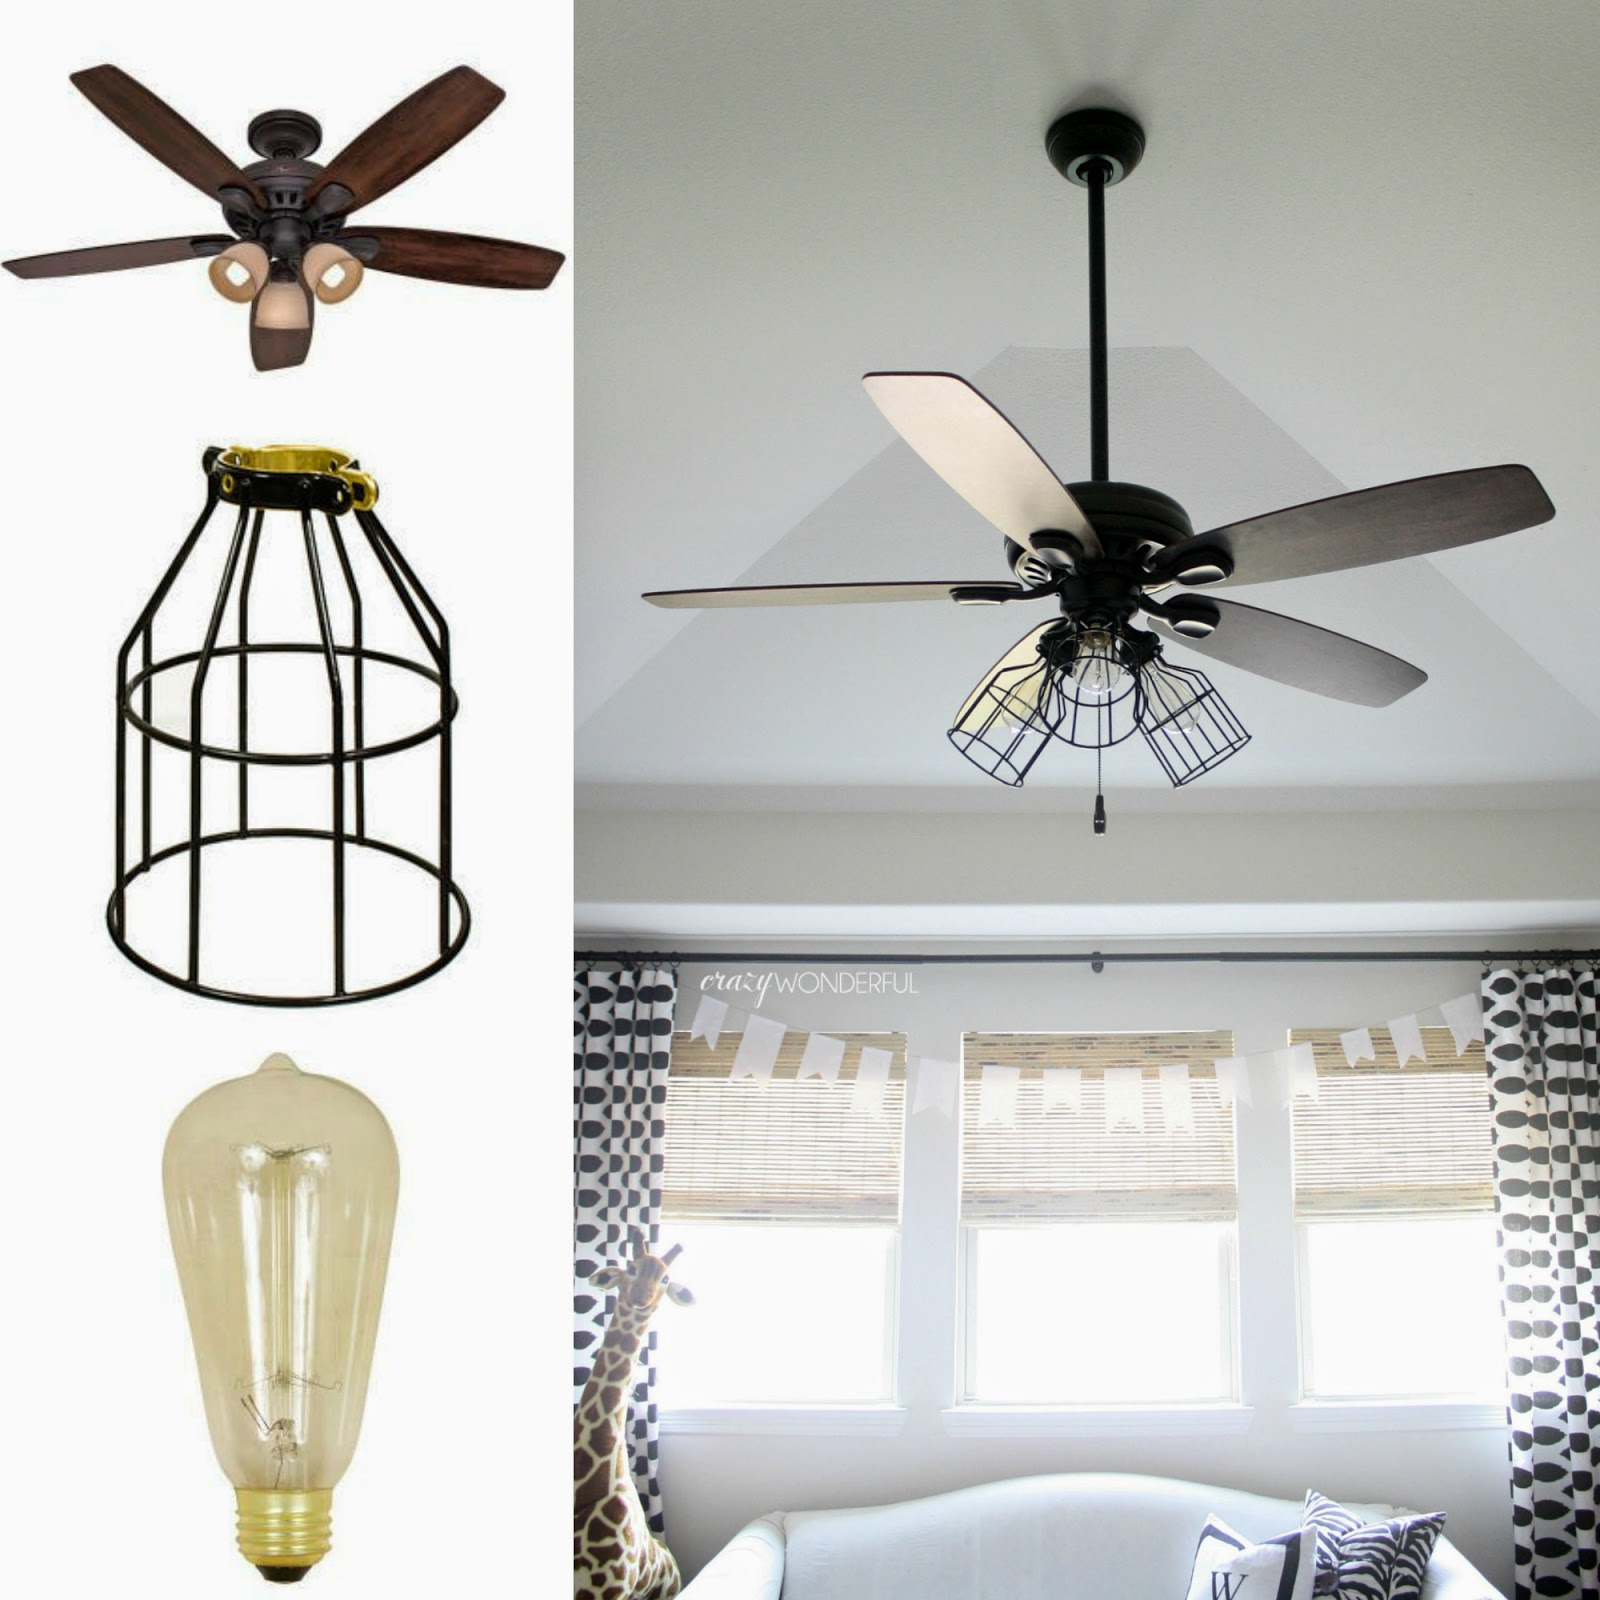 Diy Cage Light Ceiling Fan Crazy Wonderful pertaining to measurements 1600 X 1600